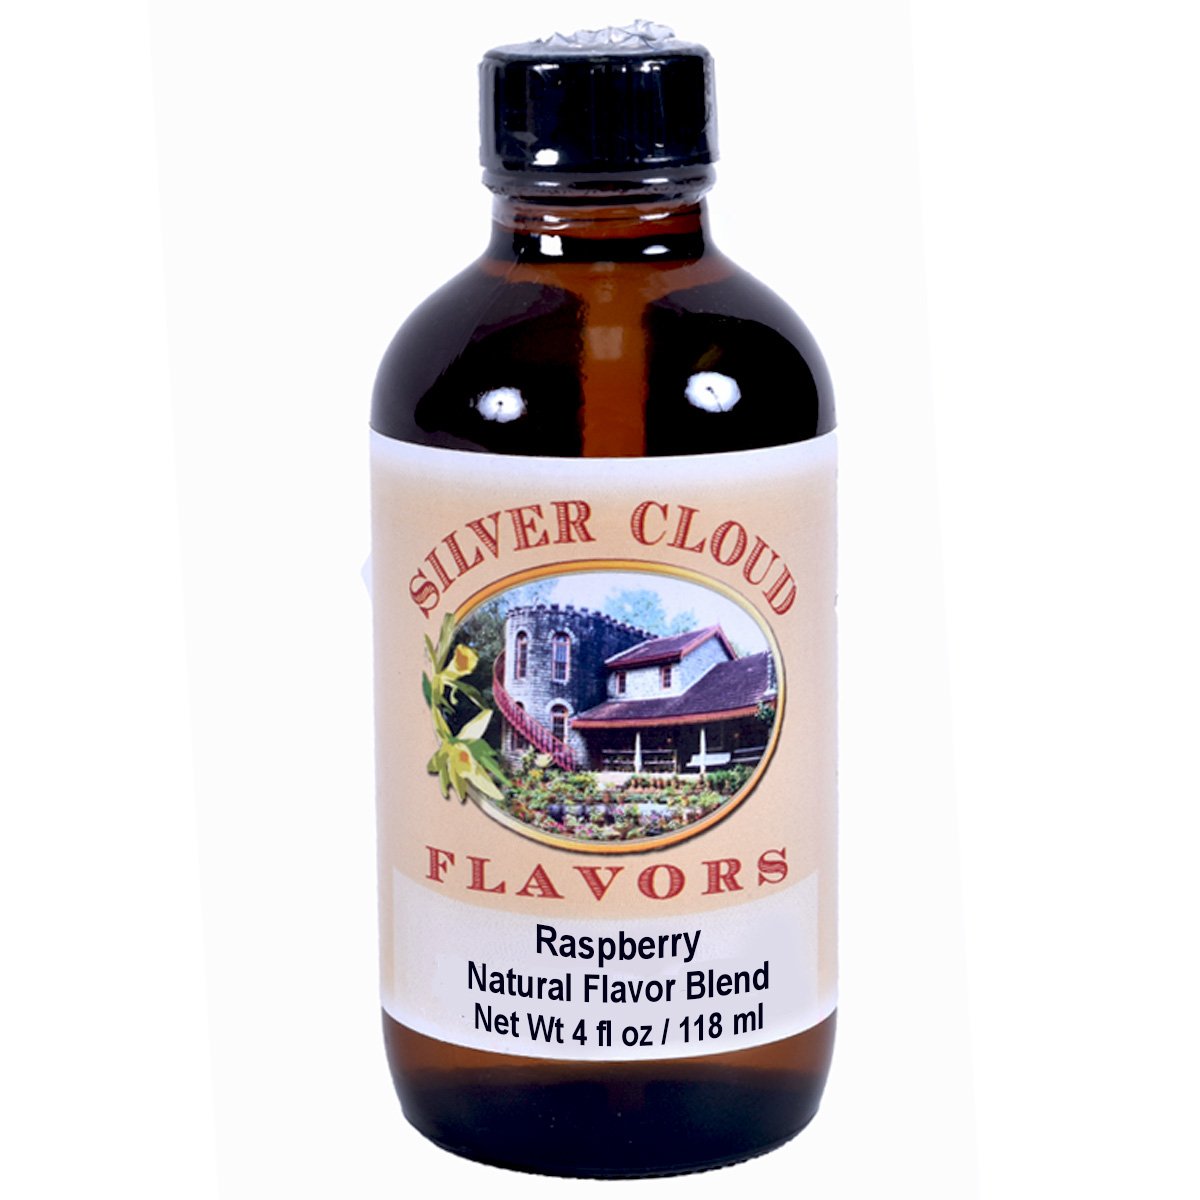 Raspberry, Natural Flavor Blend Silver Cloud Extract - Bake Supply Plus